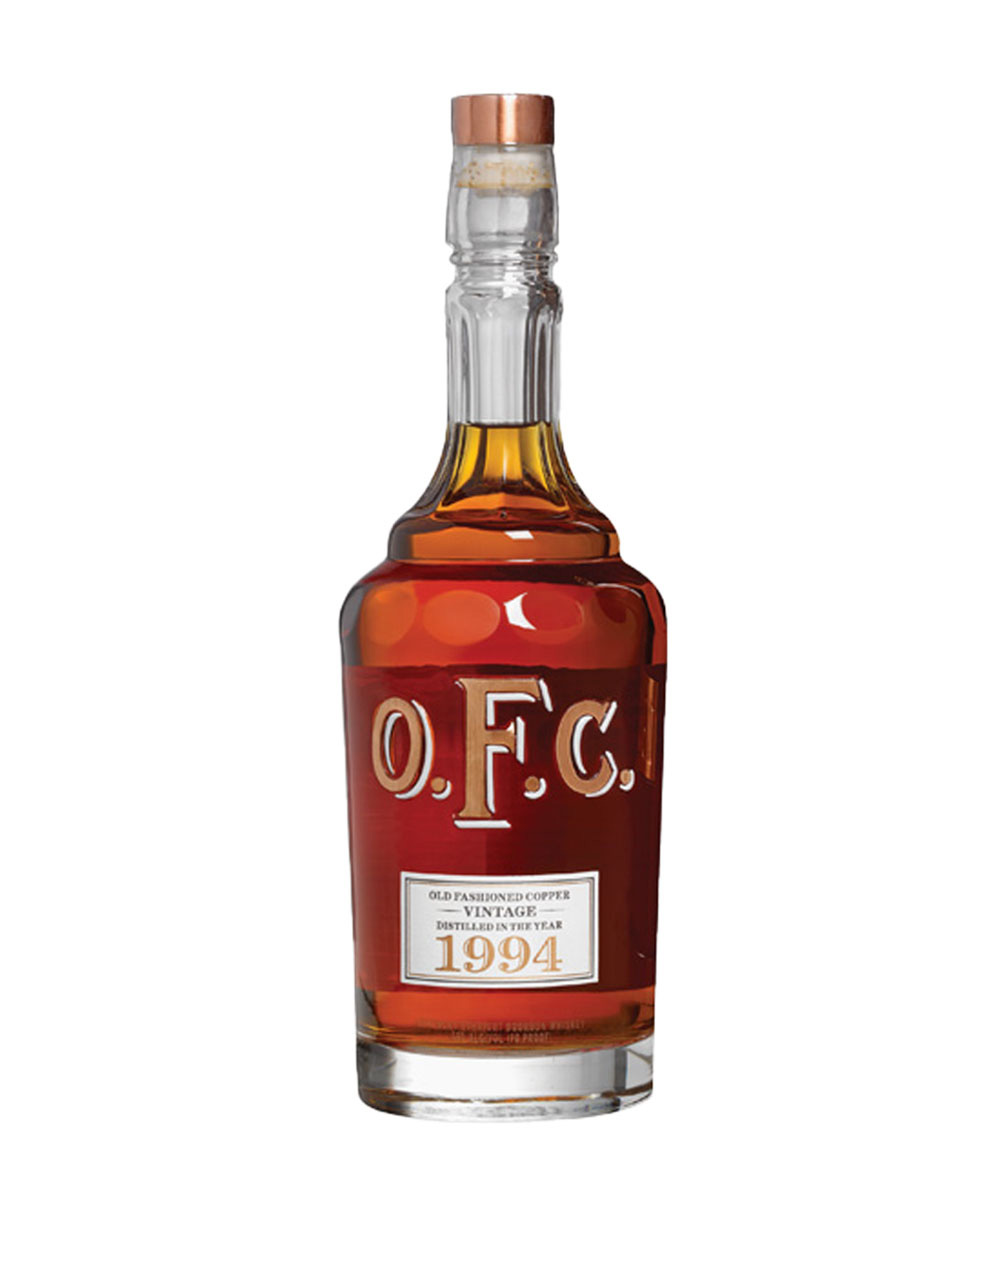 O.F.C. Old Fashioned Copper 1994 Buffalo Trace Distillery 90 proof Kentucky Straight